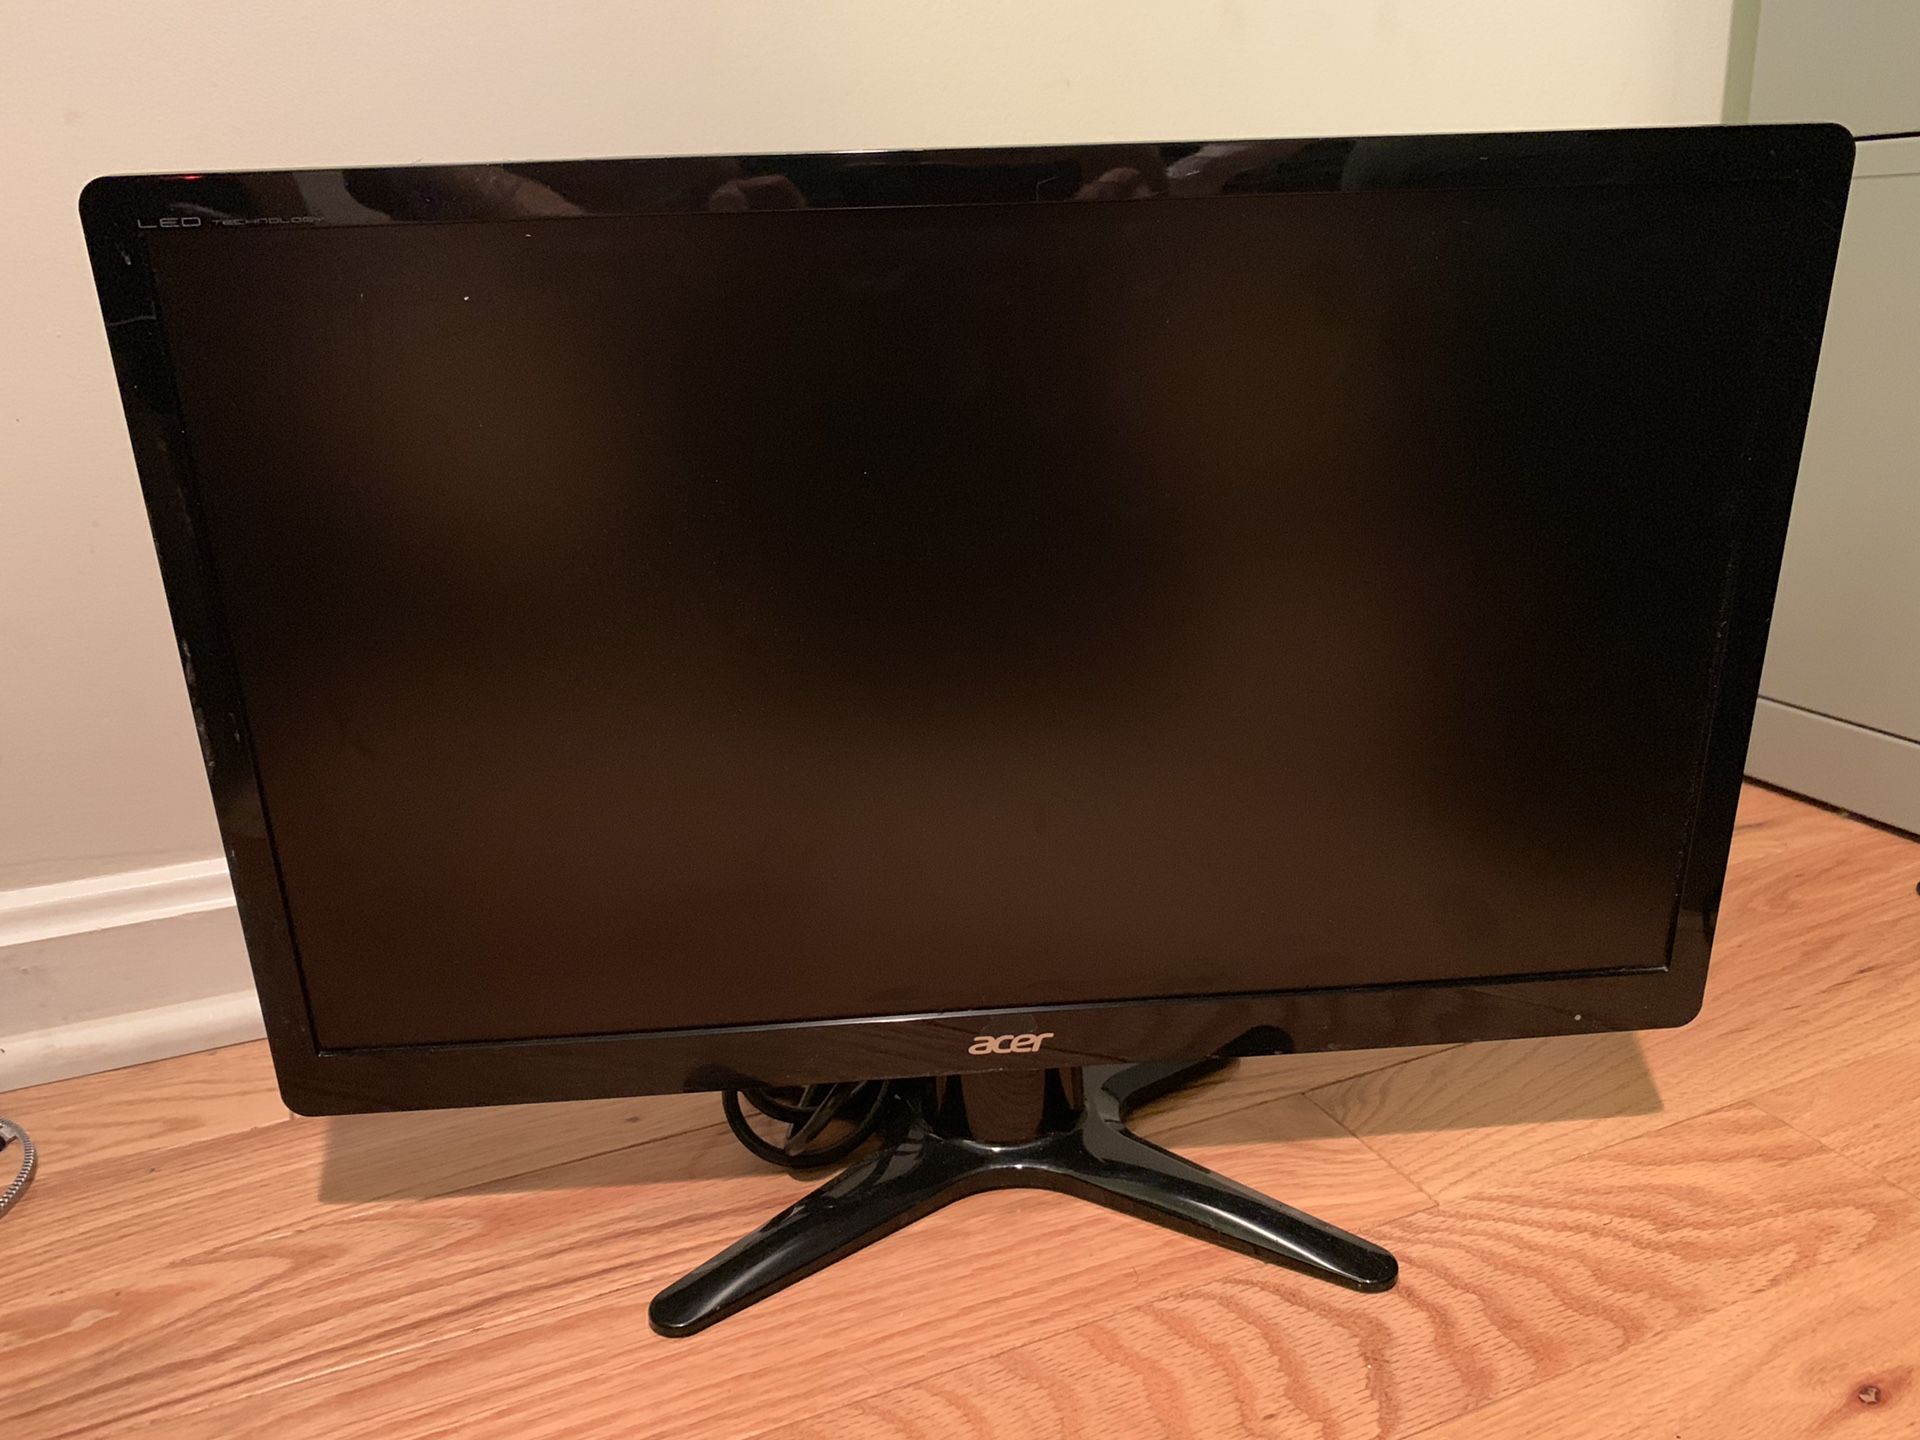 17 inch acre monitor with HP keyboard